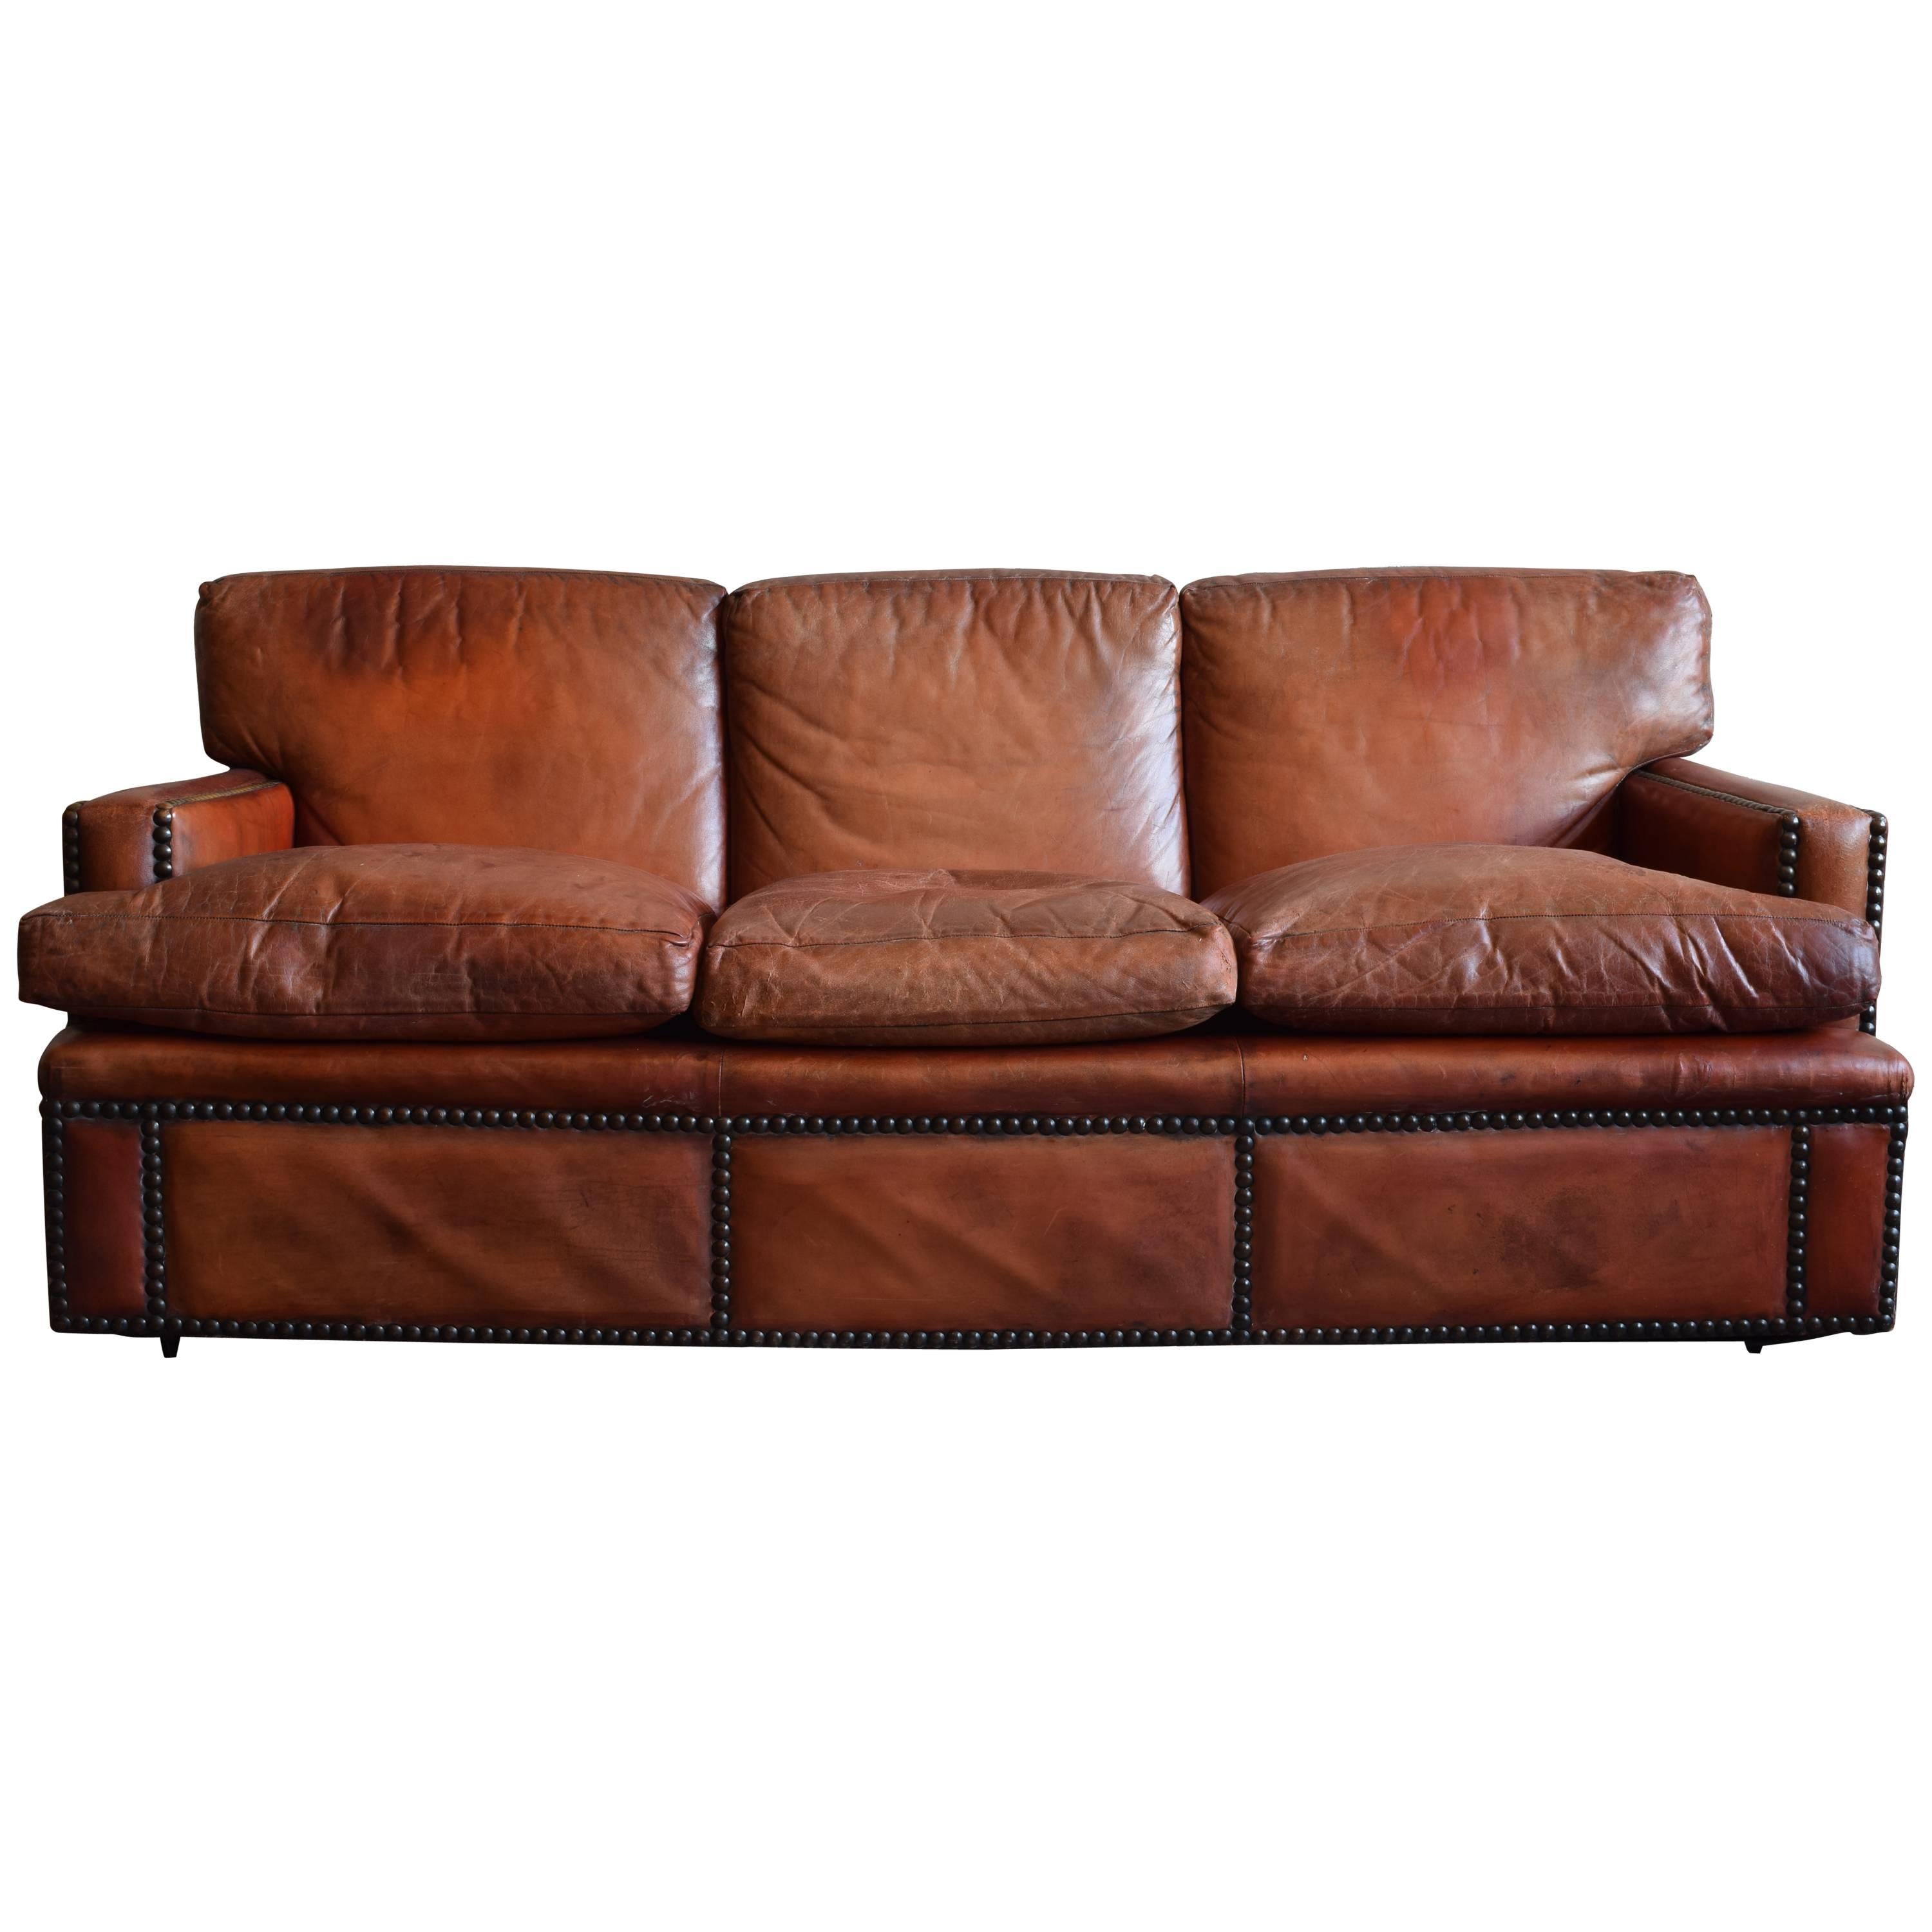 English Leather Upholstered and Nailhead Decorated Sofa, Mid-20th Century